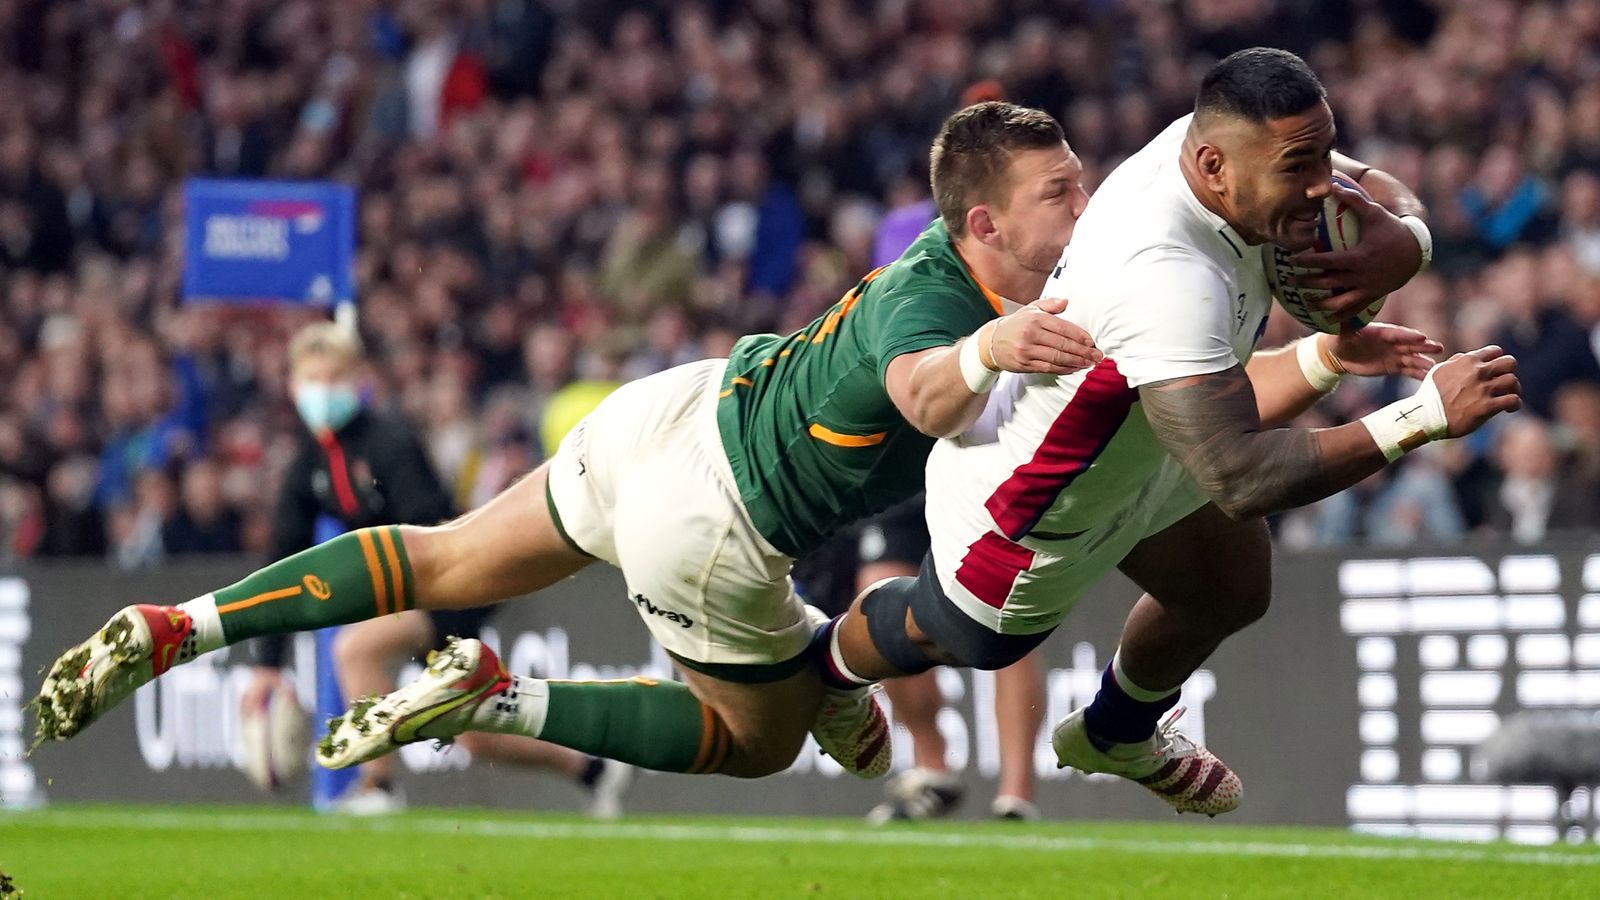 England 27 South Africa Report & Highlights